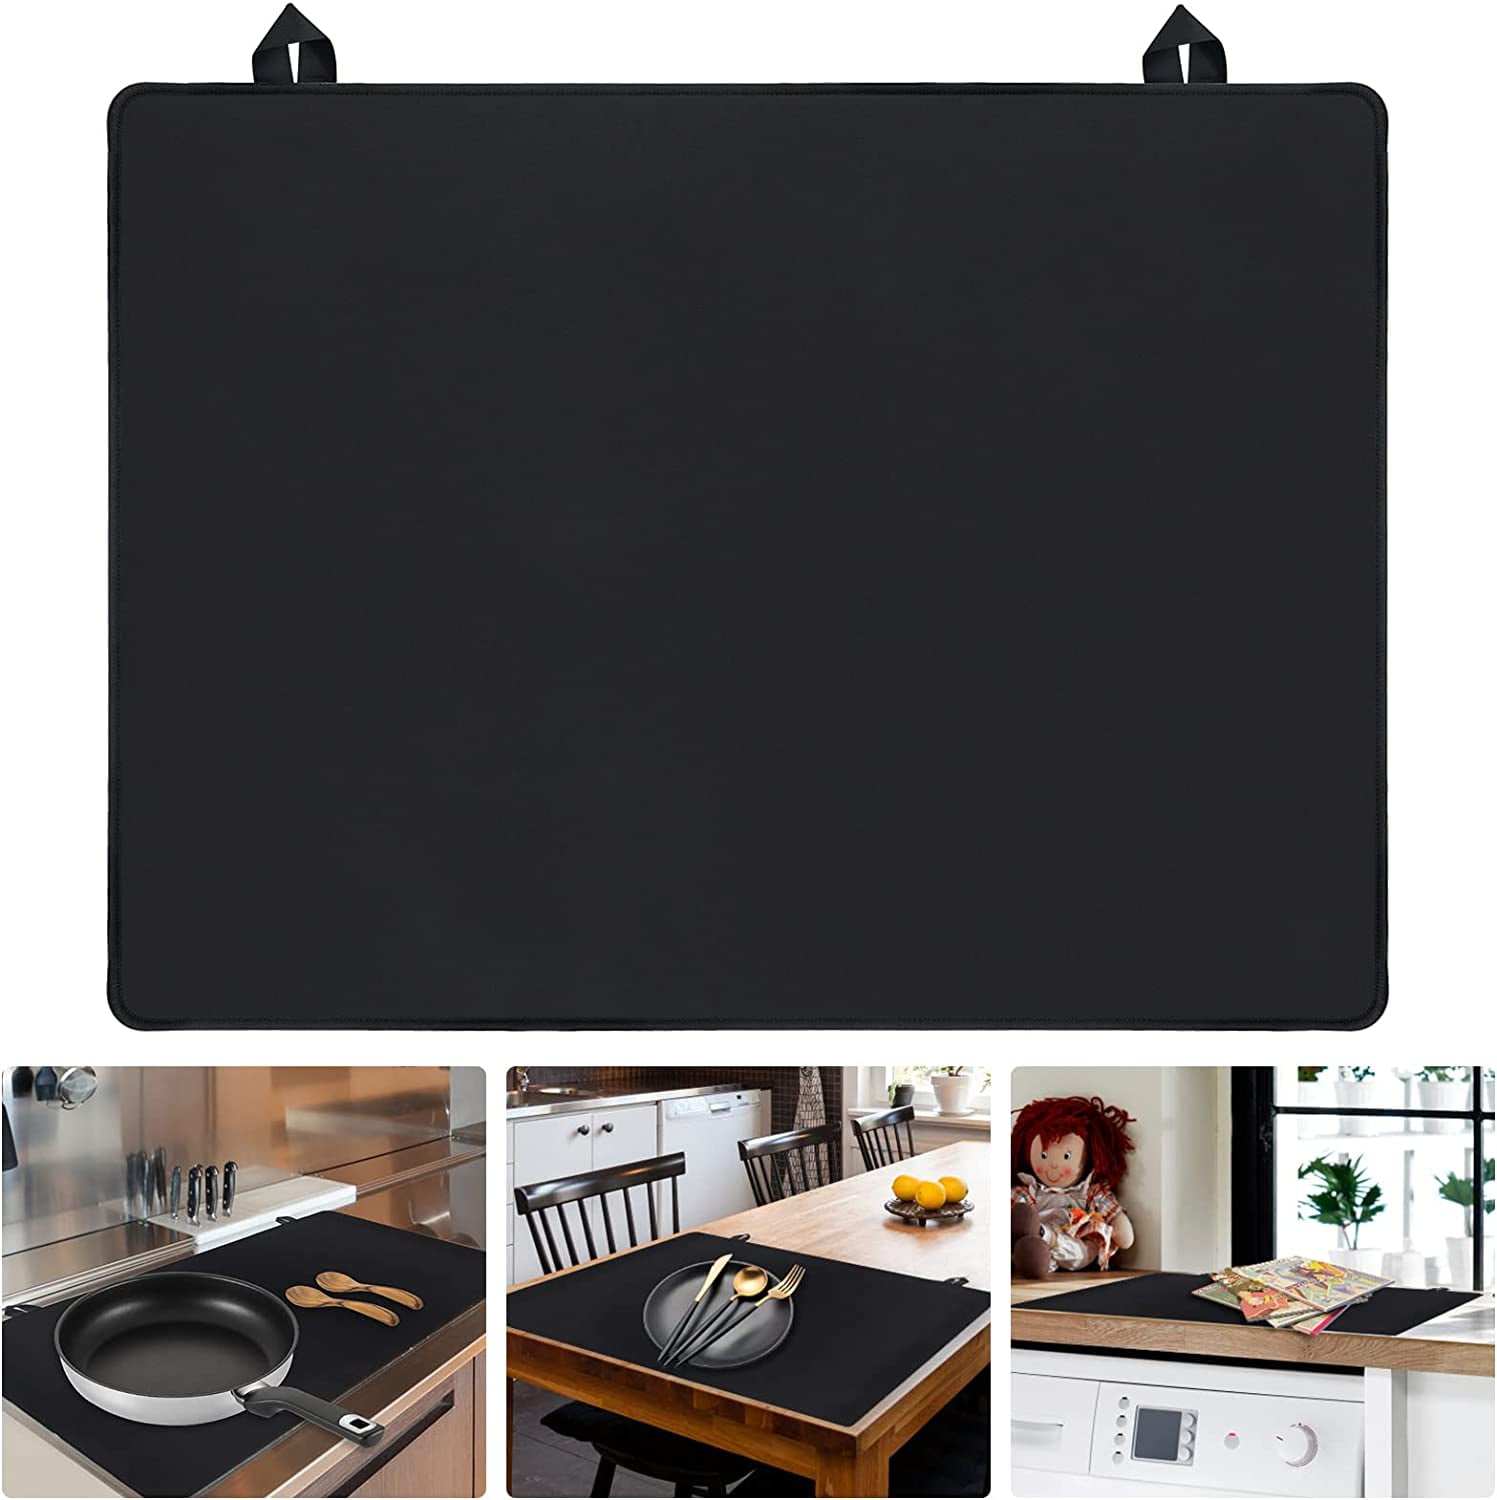  Extra Large Electric Stove Cover - Thick Natural